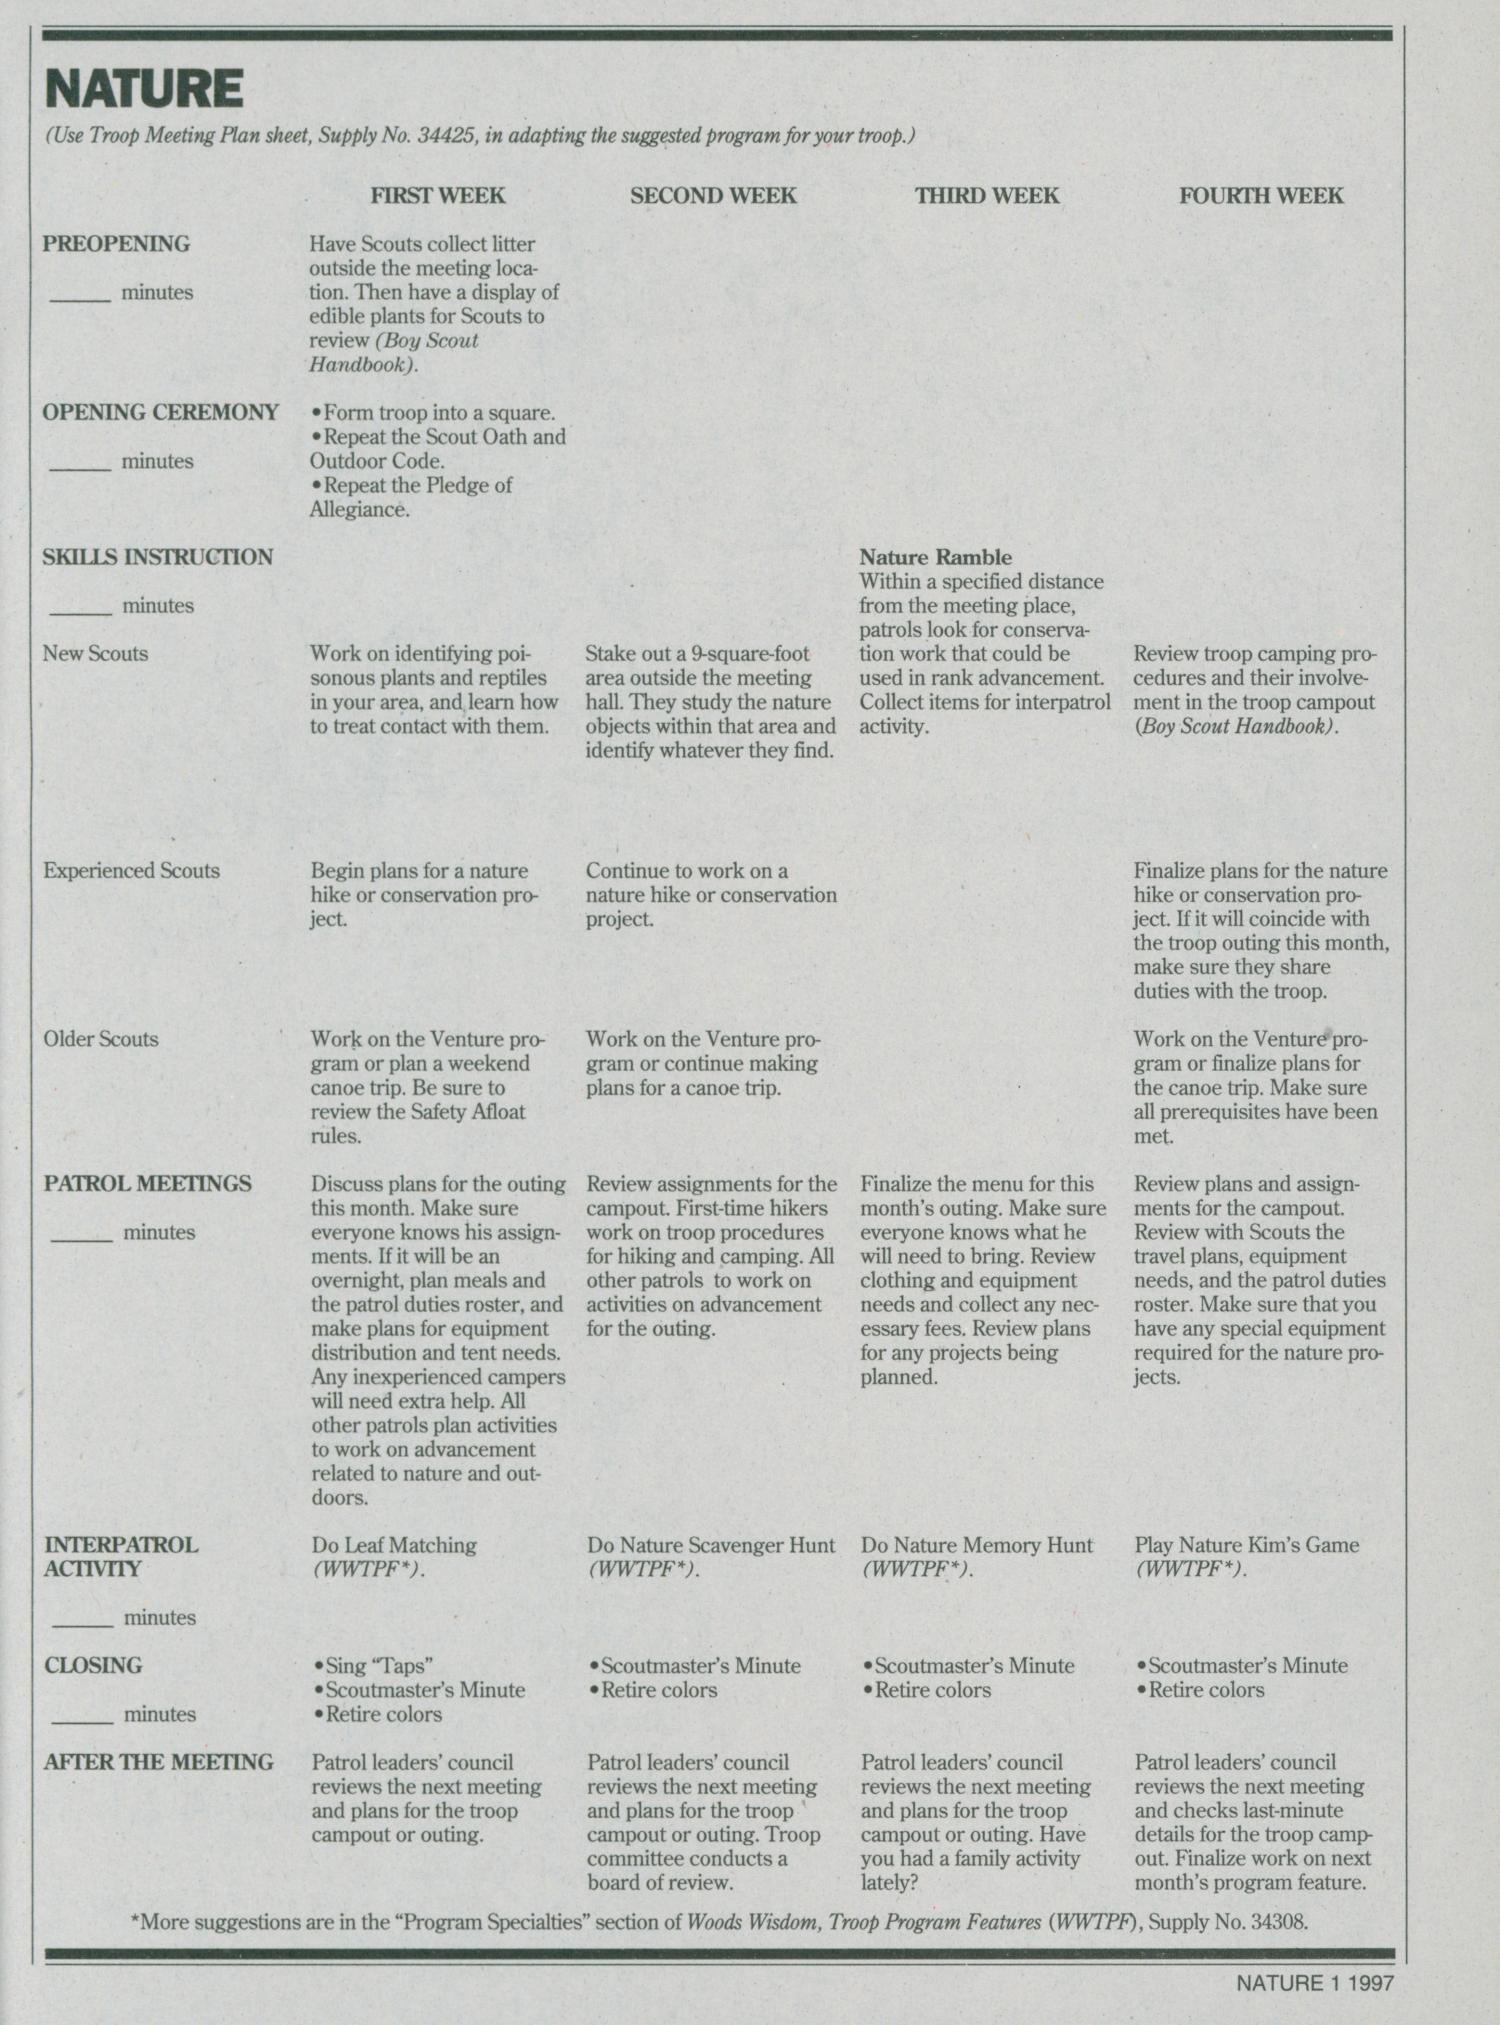 Scouting, Volume 85, Number 3, May-June 1997
                                                
                                                    1
                                                